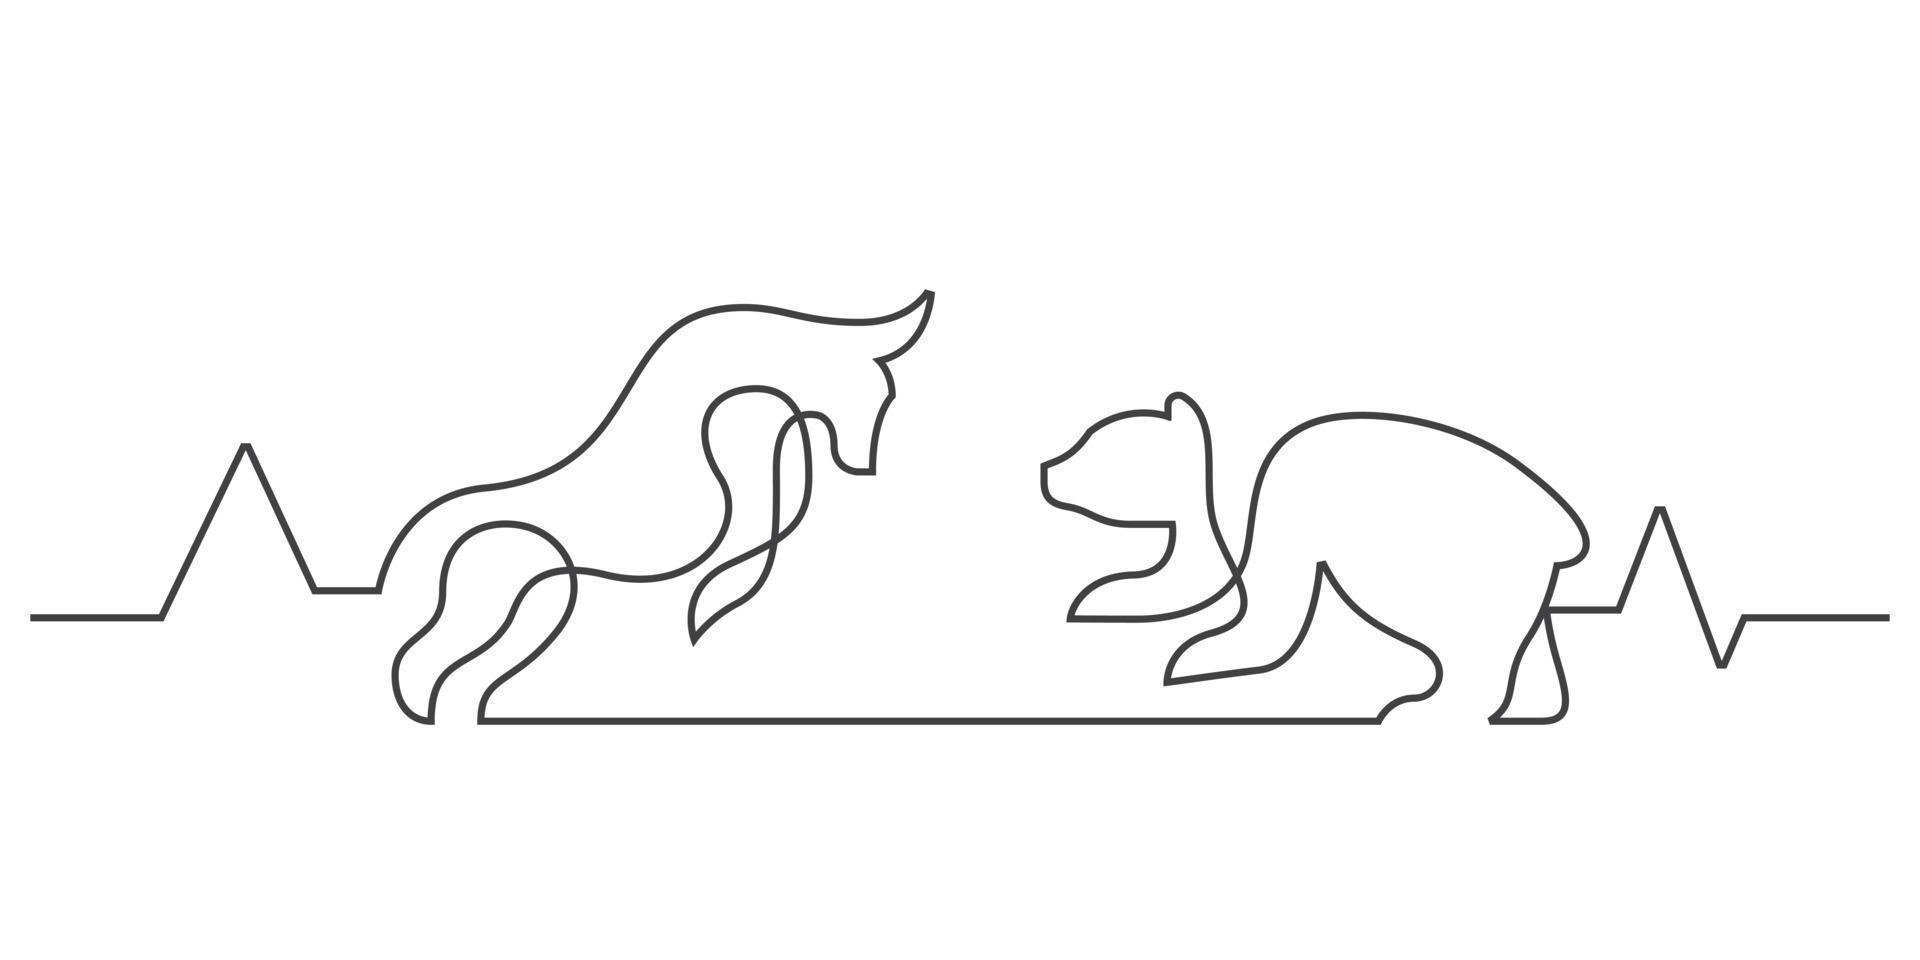 stock market exchange bull and bear concept continuous line drawing vector